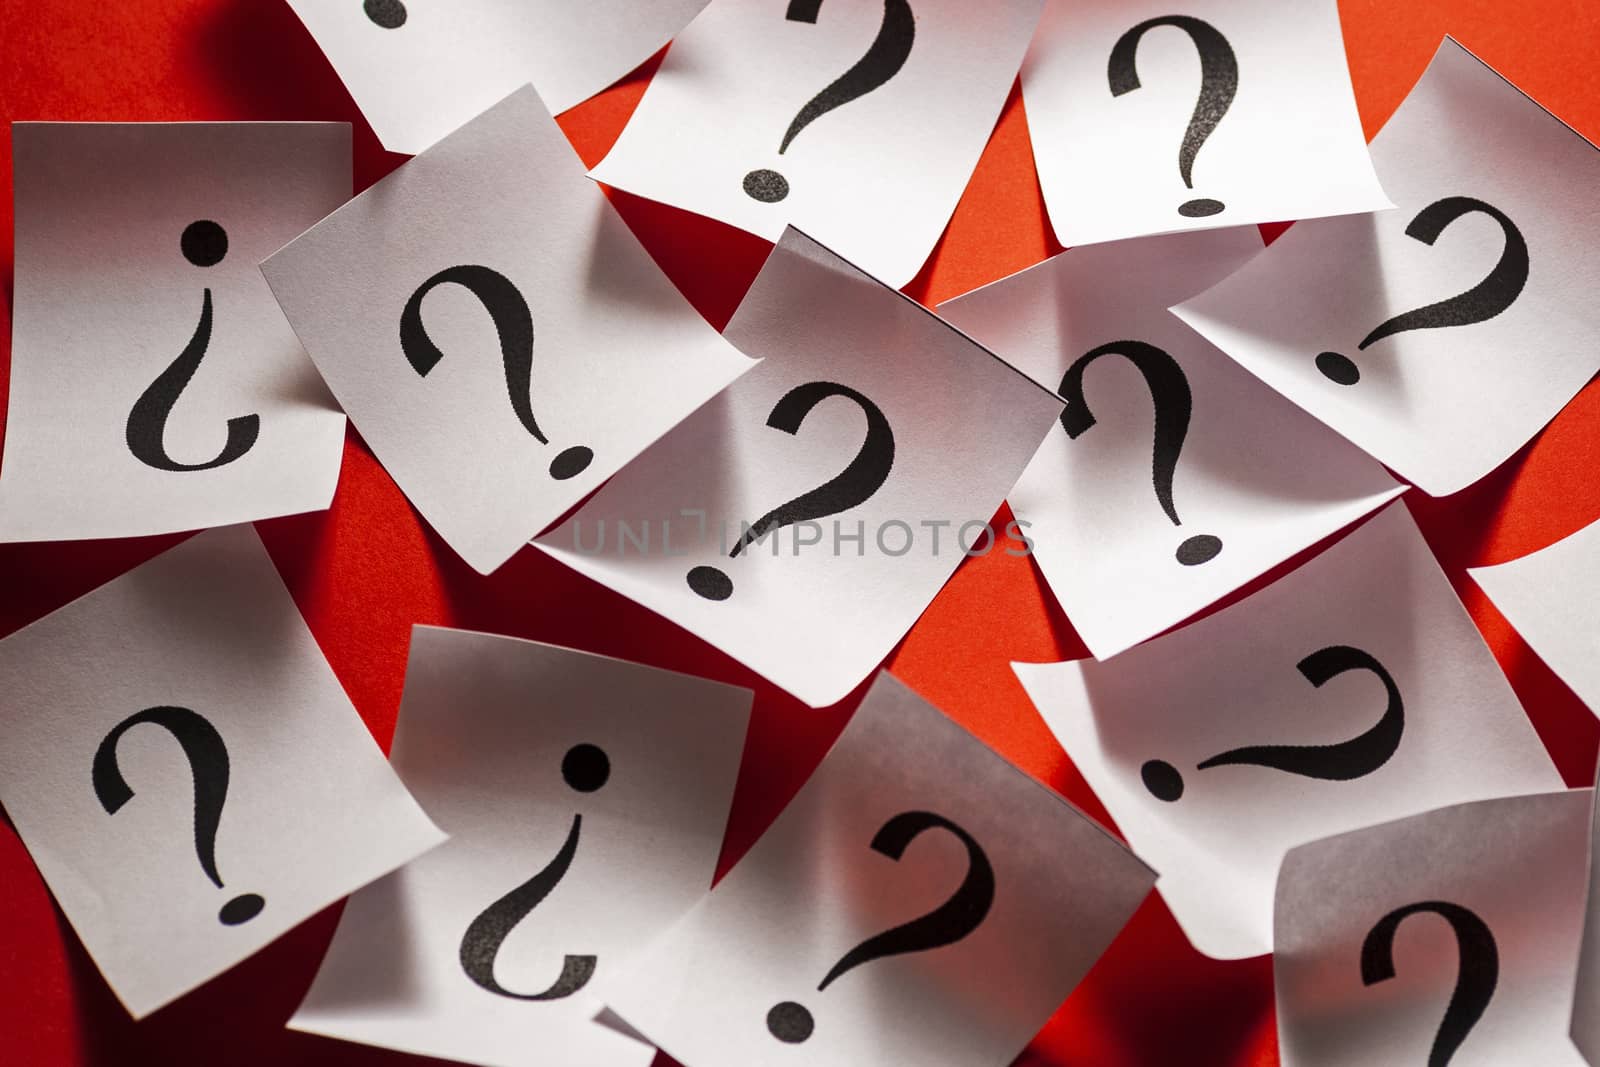 Randomly scattered question marks on white paper over a colorful red background in a conceptual image